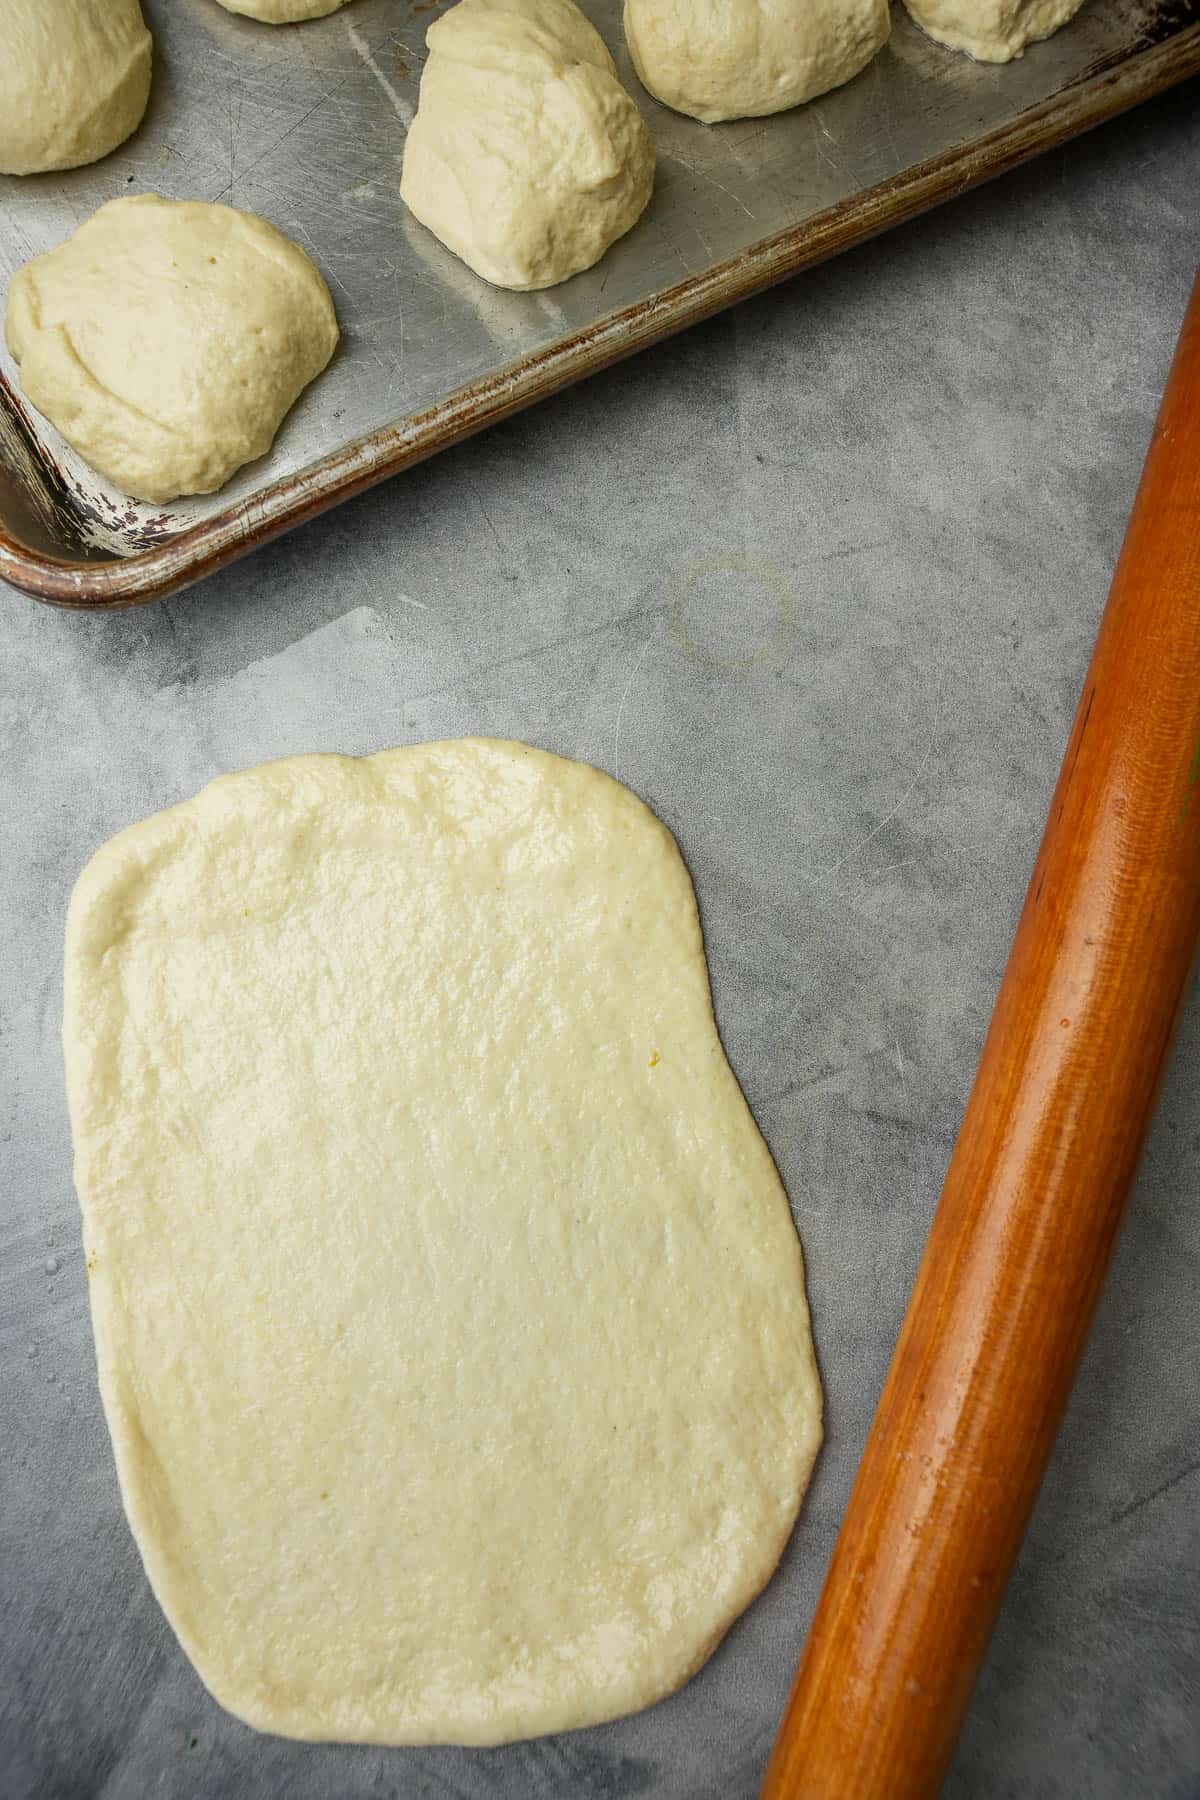 A portion of dough is rolled out to form a thin rectangle. A rolling pin and tray of dough balls are also on the table